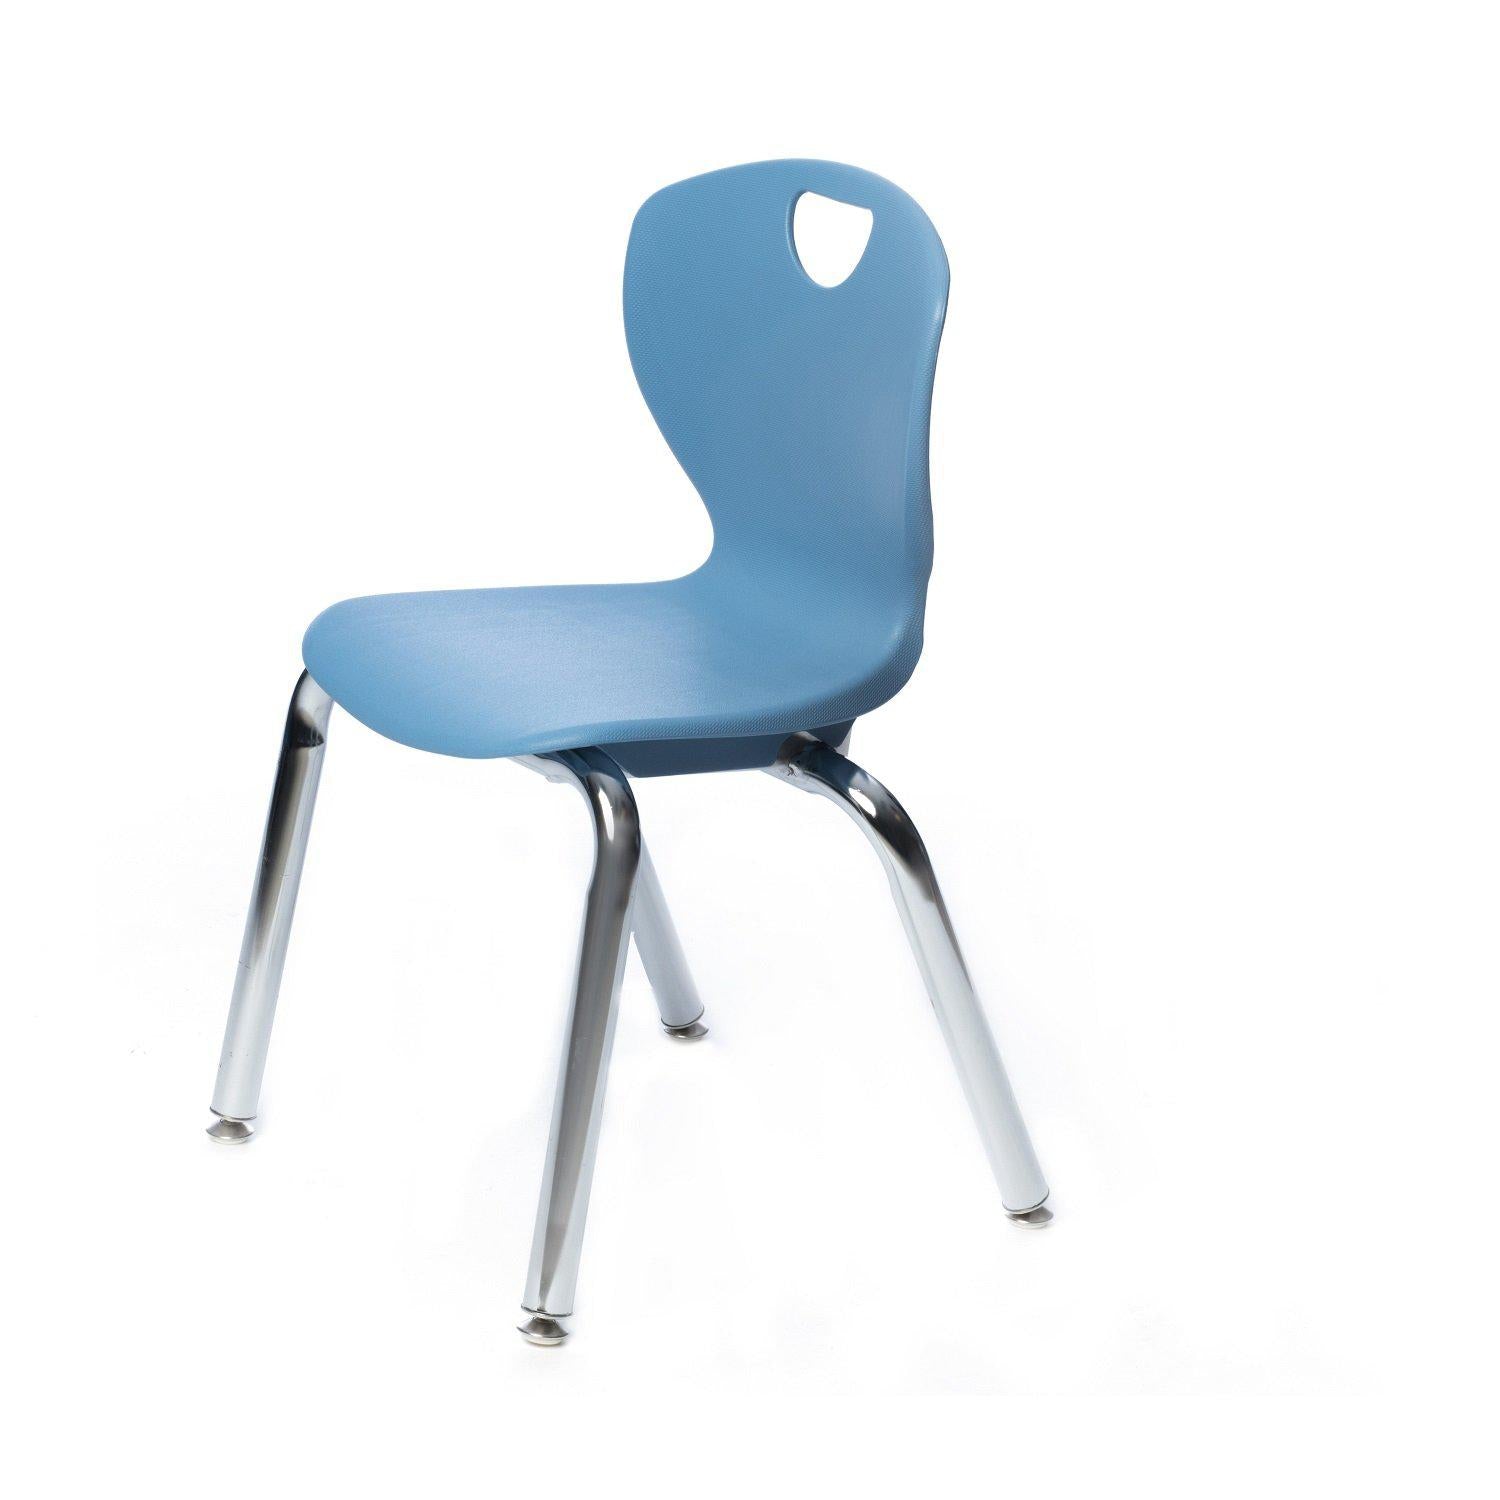 Ovation Contemporary Classroom Stack Chair, 14" Seat Height